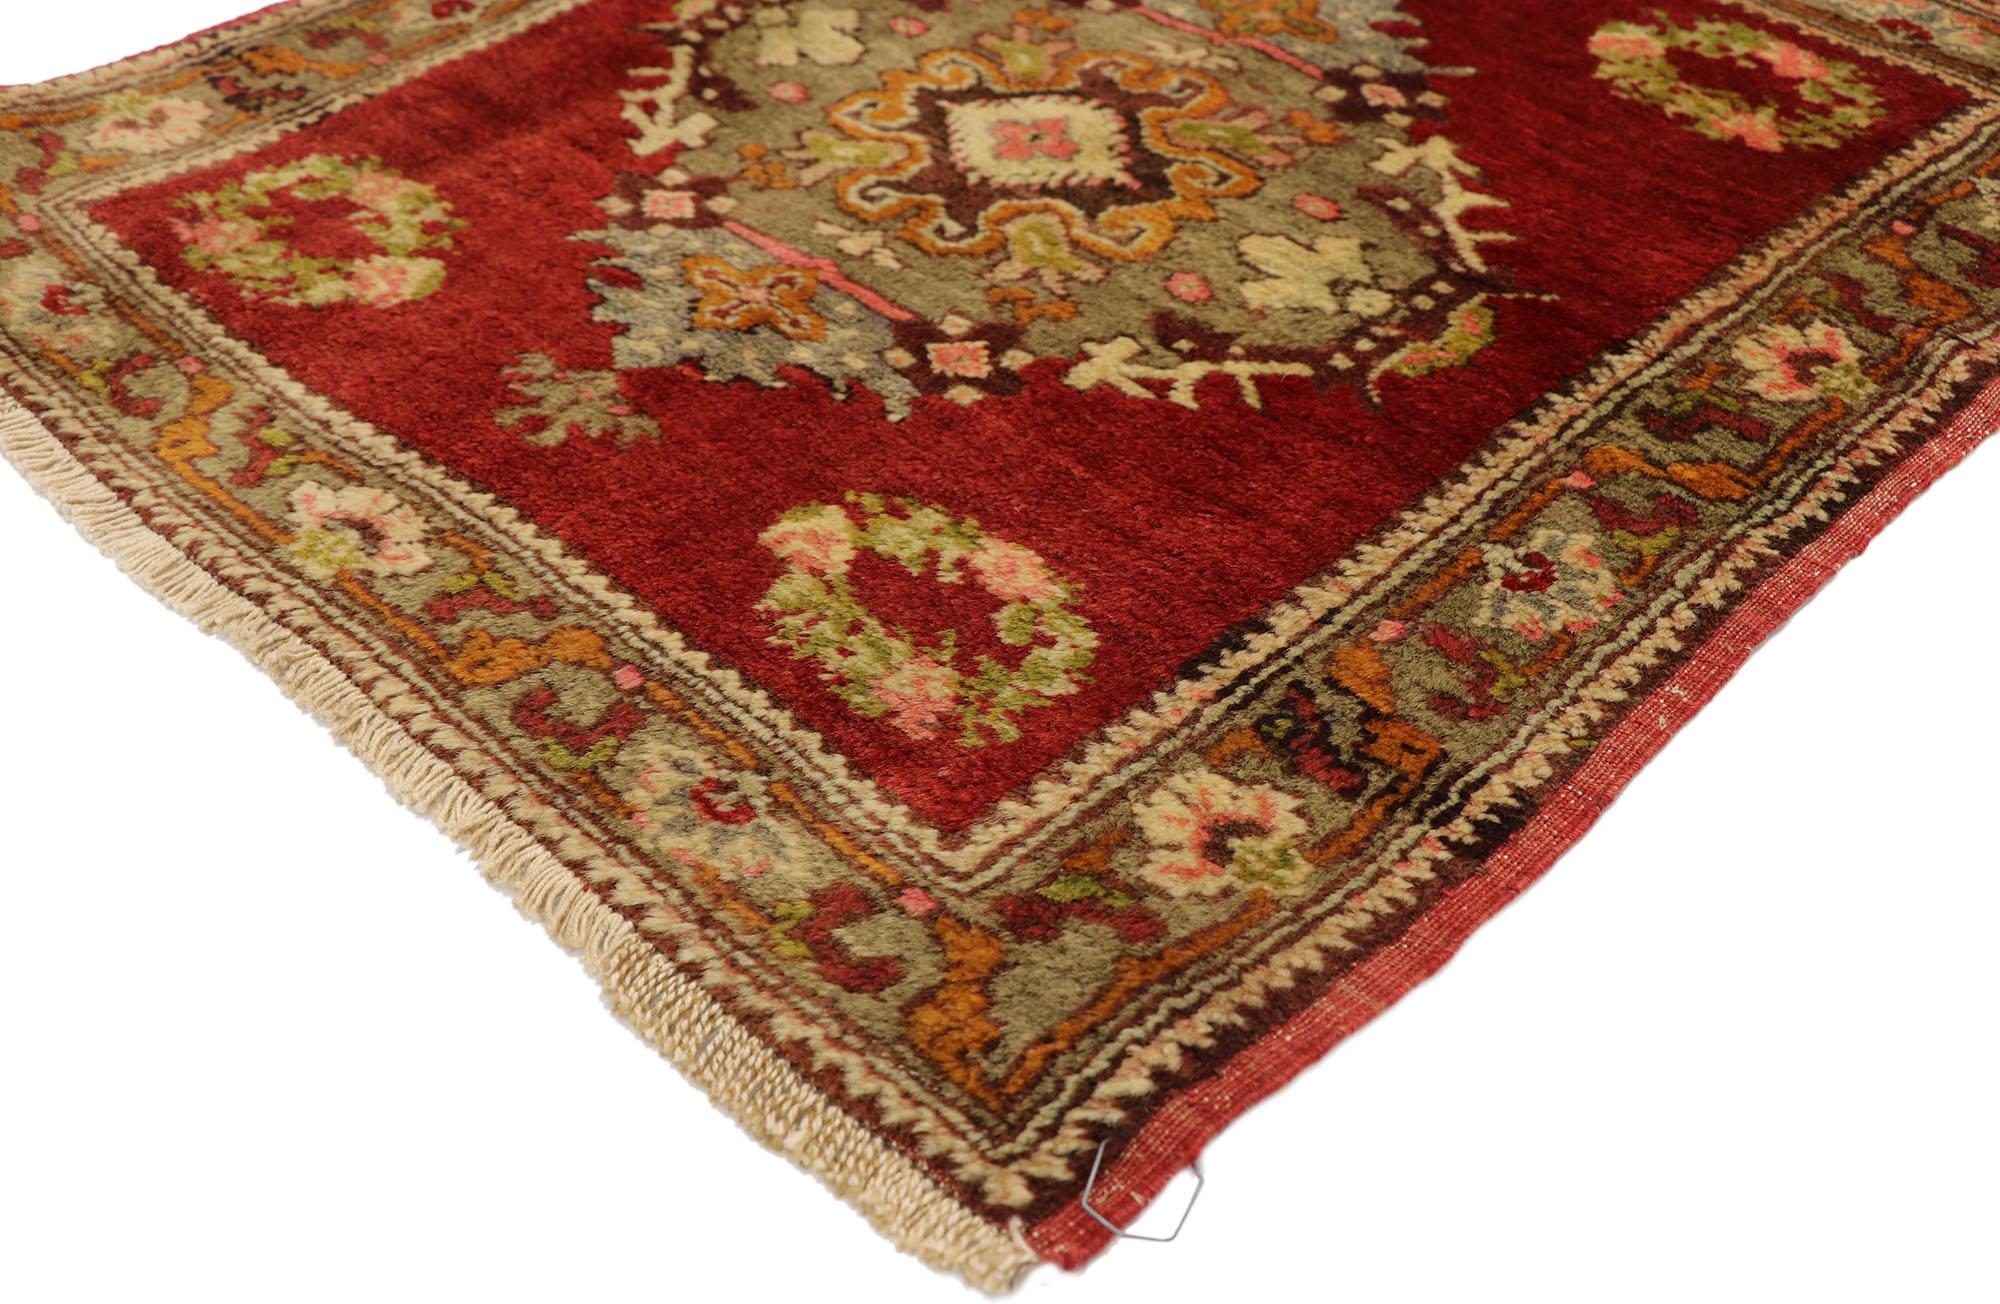 Hand-Knotted Vintage Turkish Oushak Yastik Scatter Rug, Small Square Accent Rug